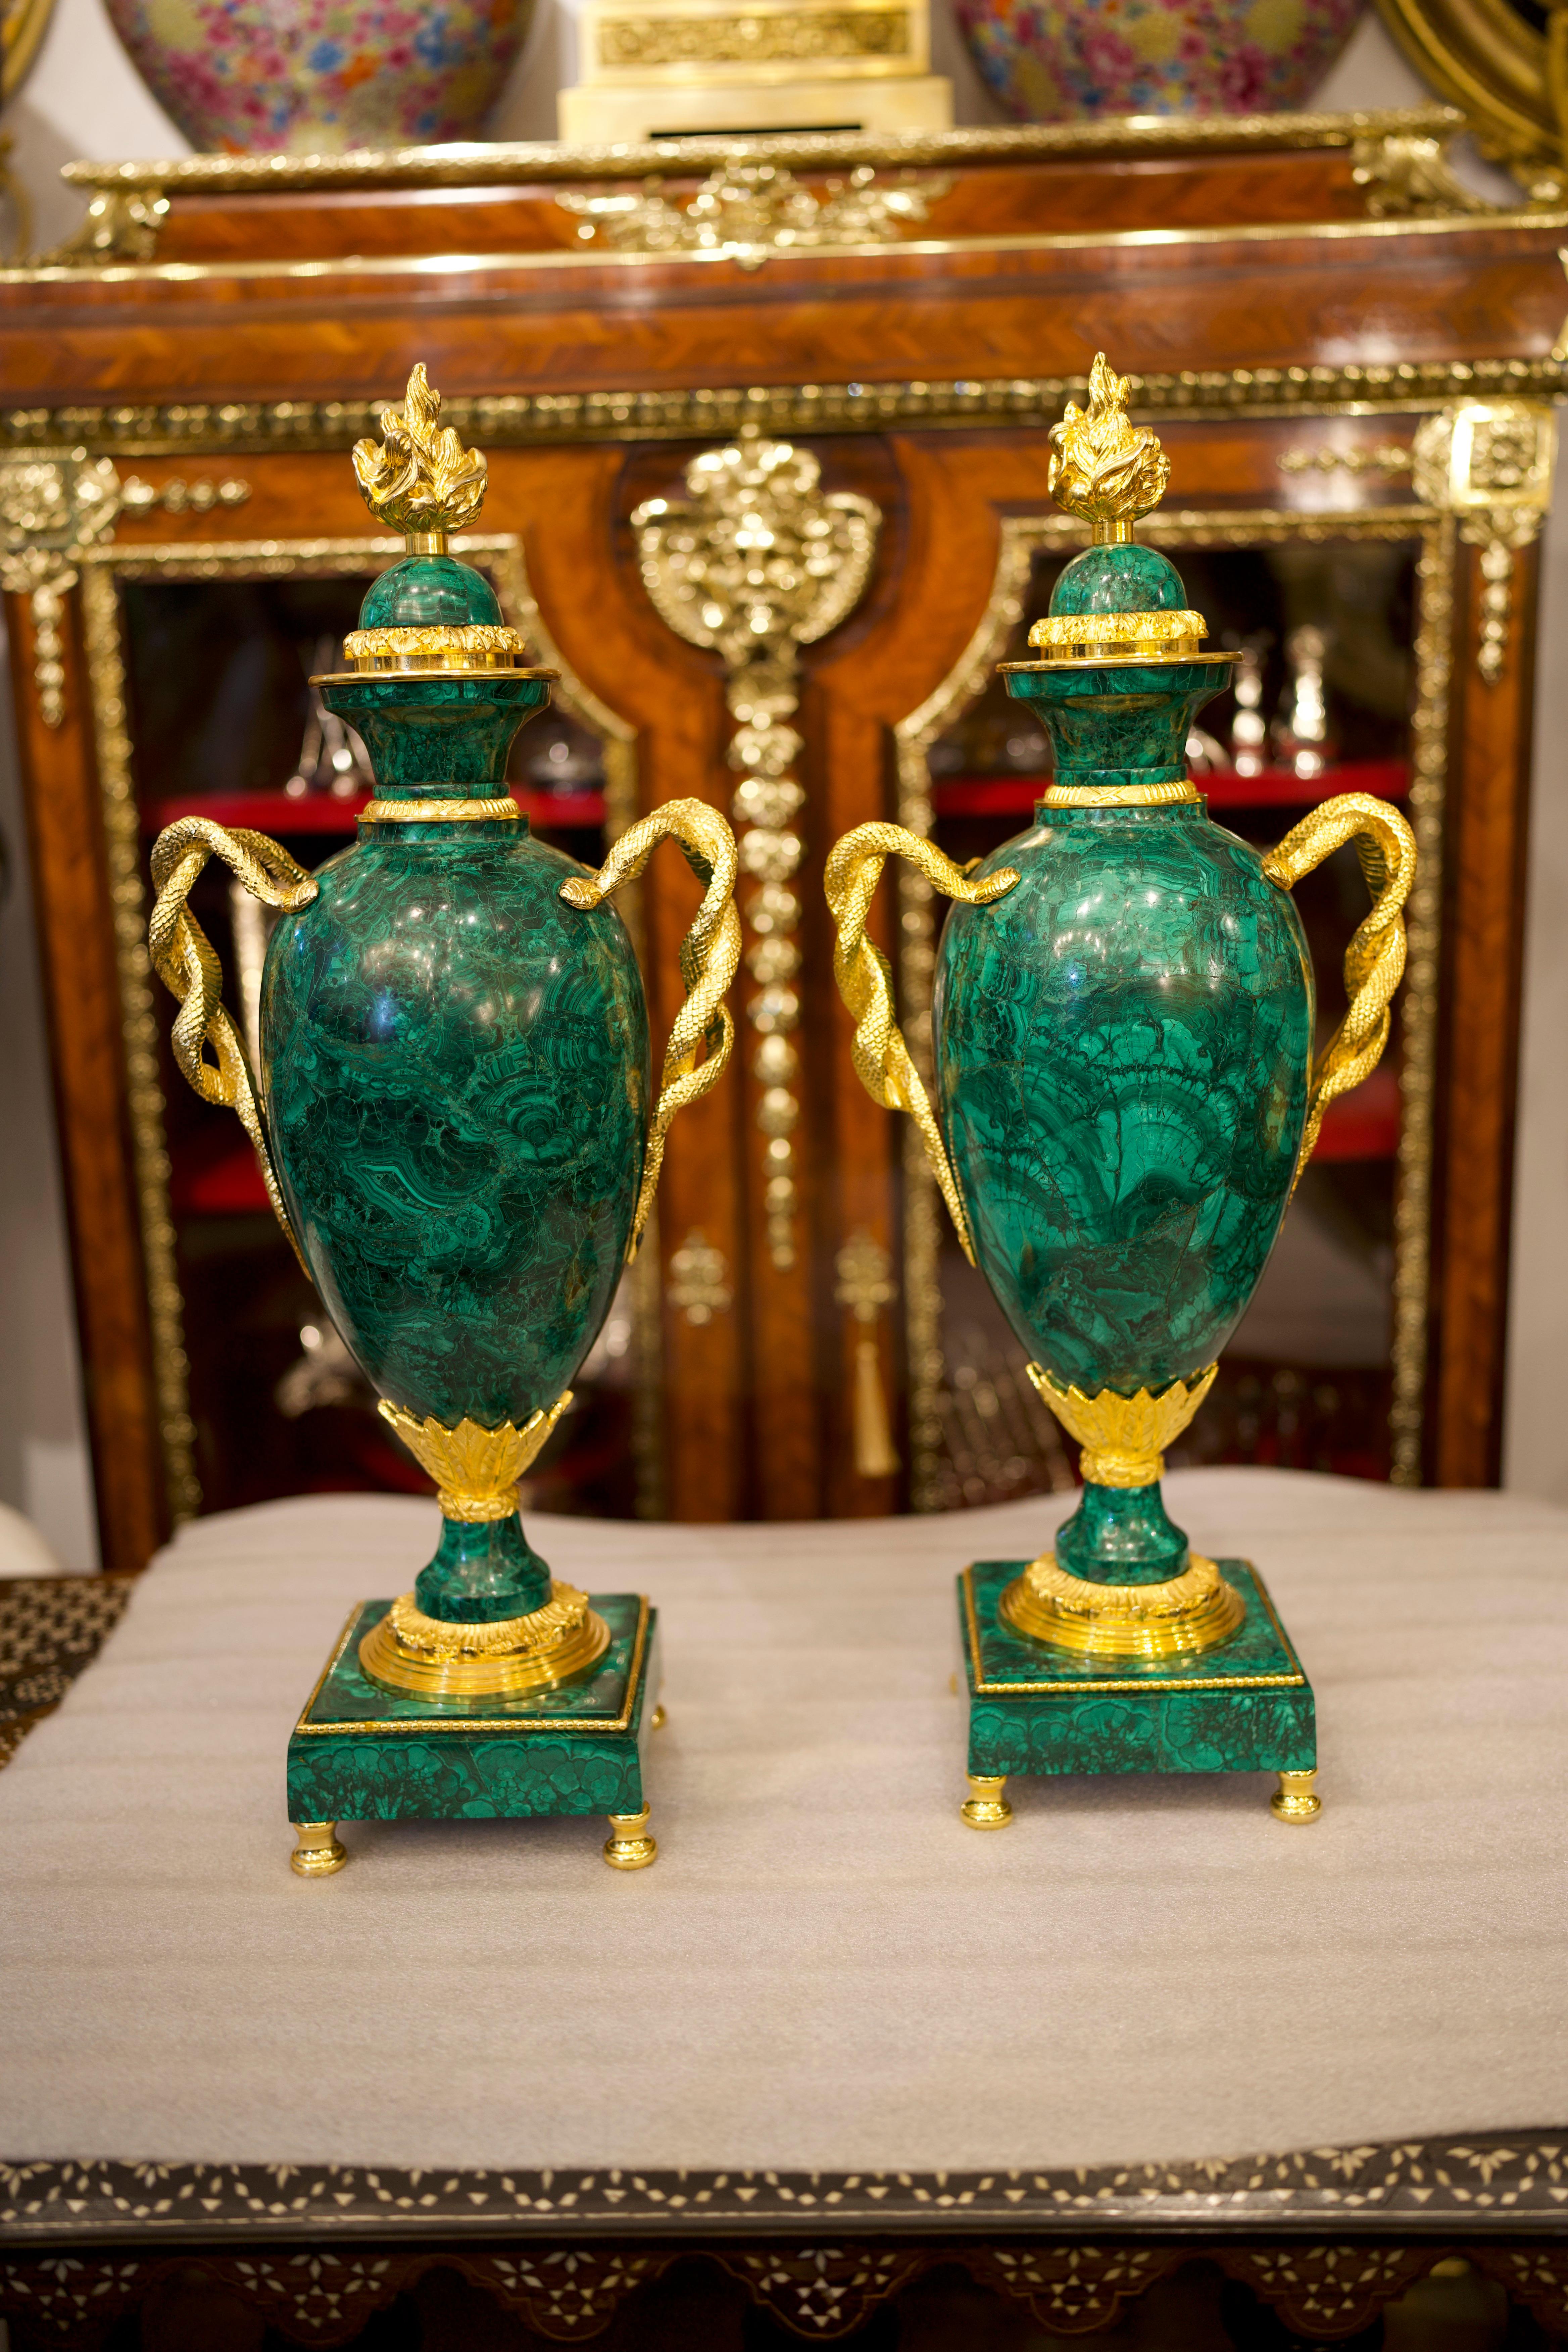 A beautiful pair of large ormolu mounted malachite Empire style vases.

Executed in a mixture of styles but dominated by an Empire influence, these striking malachite and ormolu mounted vases were made in the early twentieth century. They feature